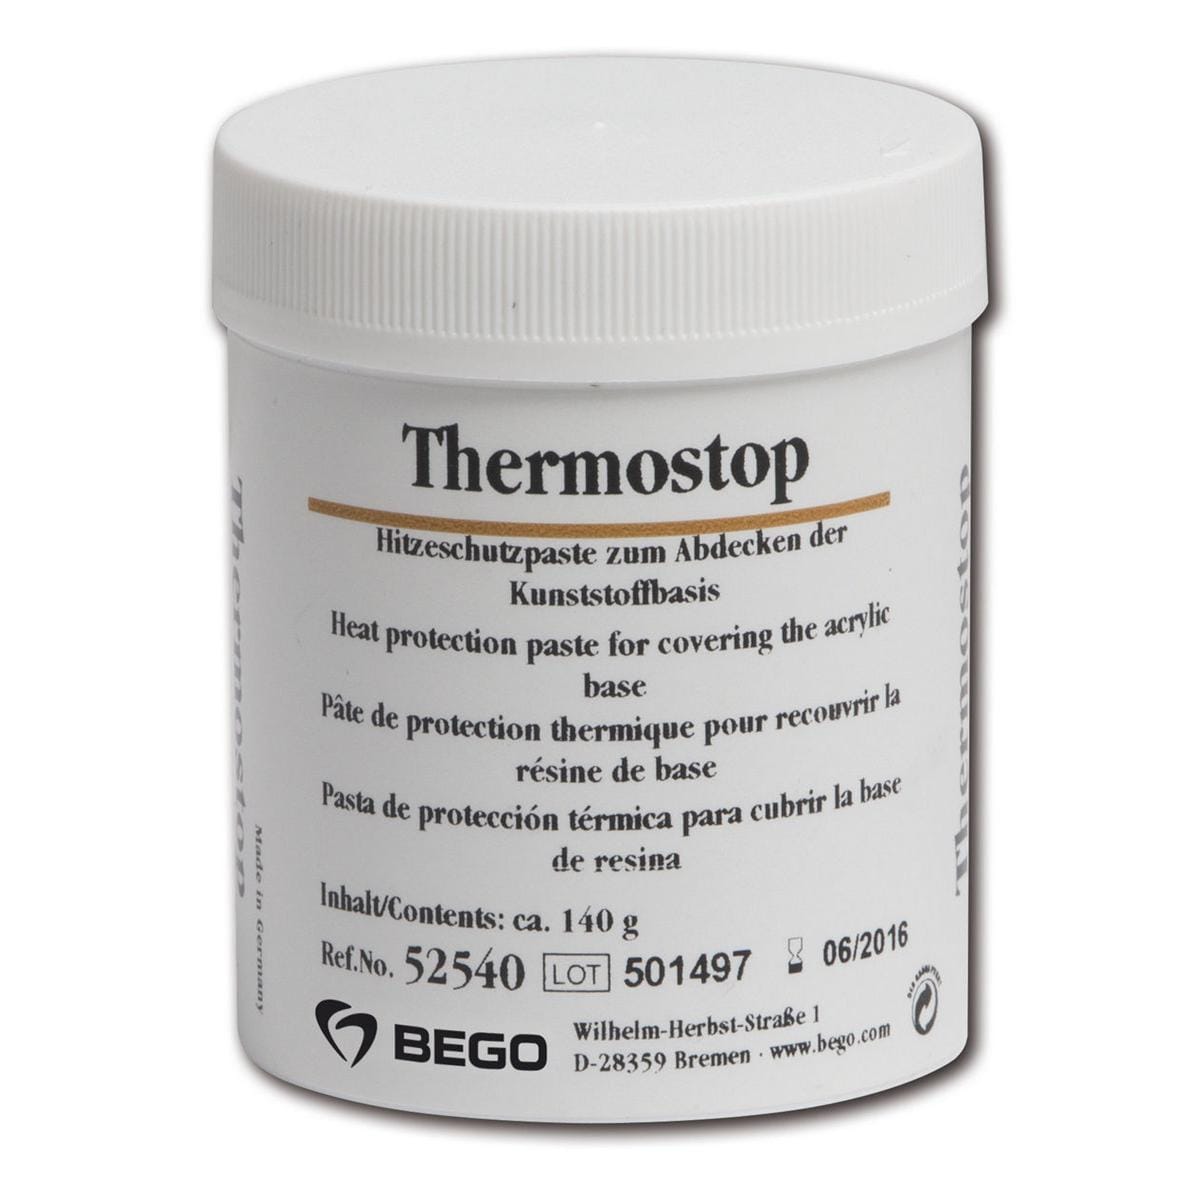 Thermostop - Dose 140 g